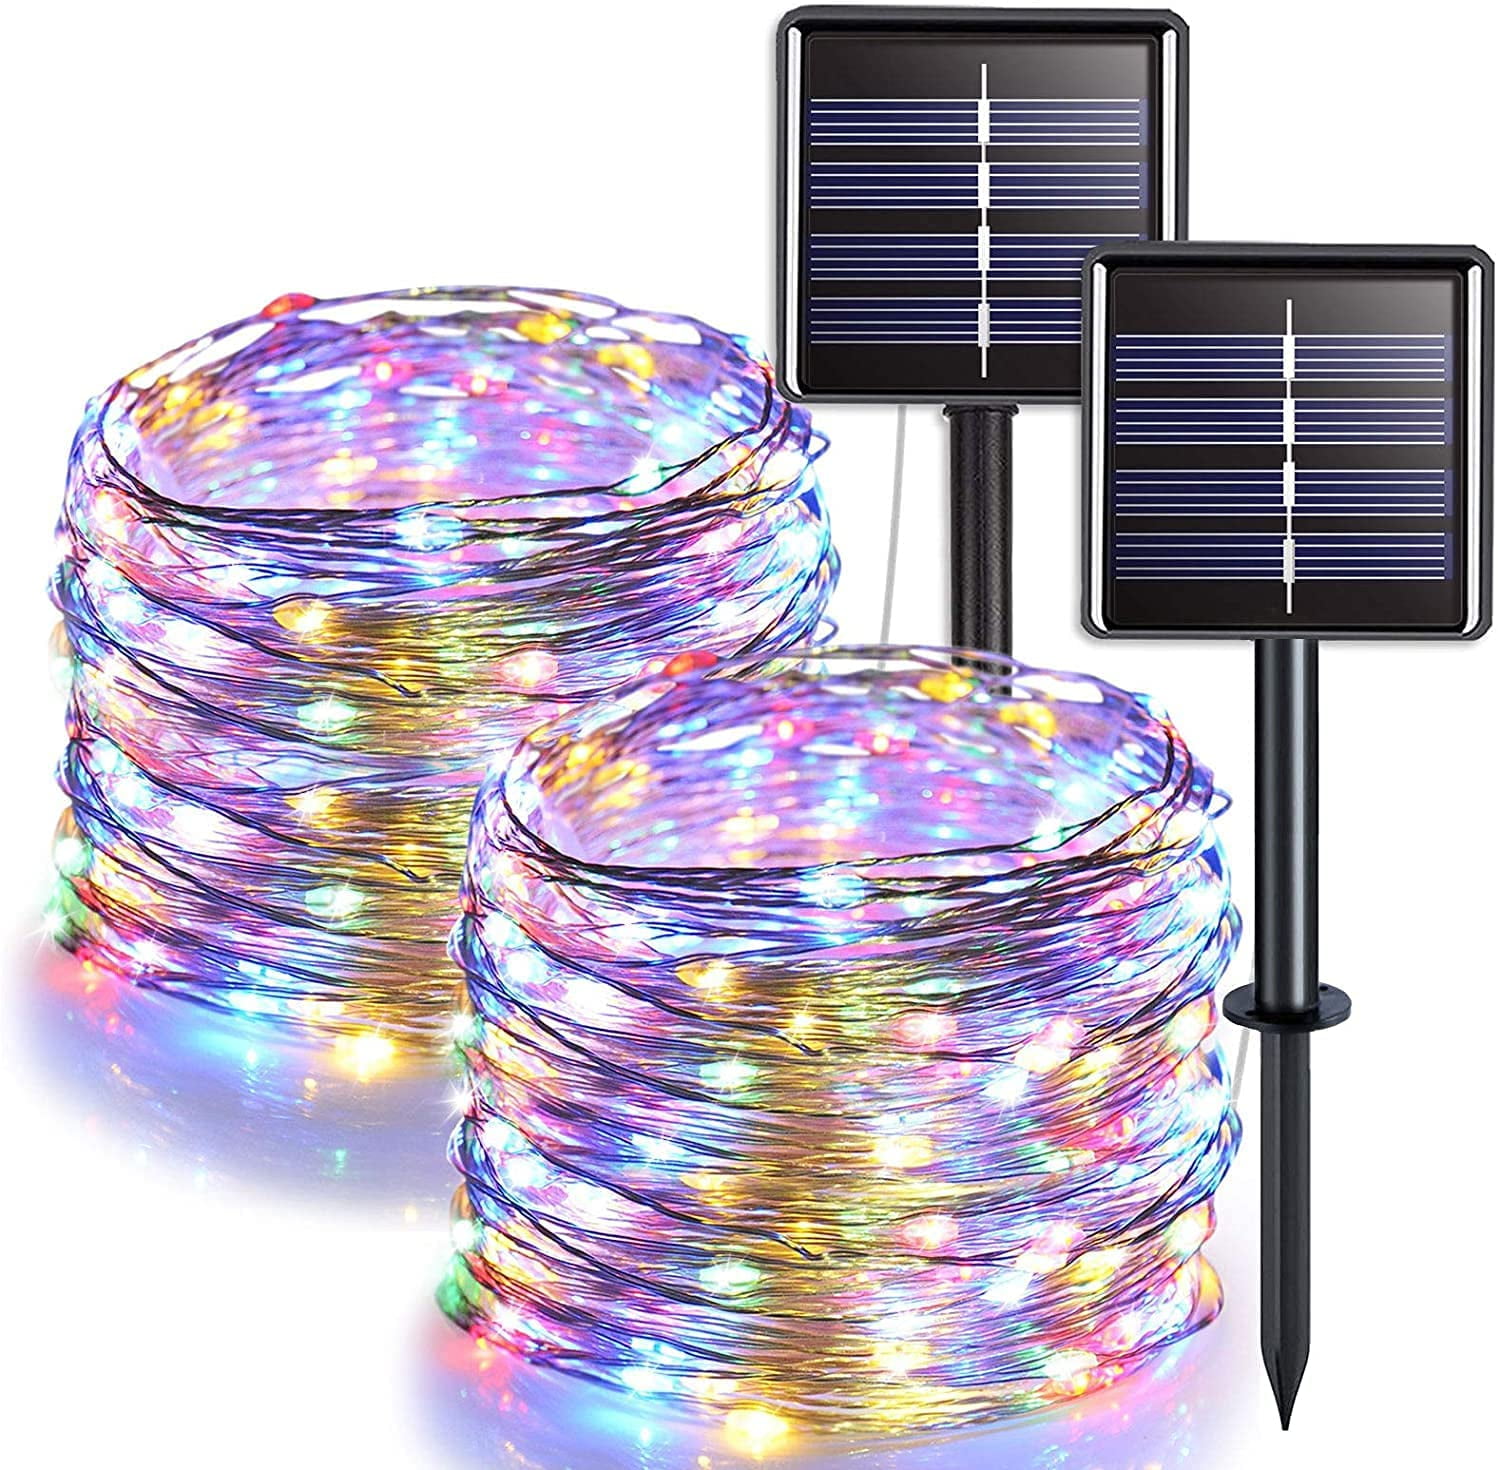 2 Pack Solar Powered Outdoor Waterproof Tube Light with 100 LED GIGALUMI Solar Rope String Lights Outdoor 35.7 feet 8 Modes Fairy Lights for Garden Fence Patio Yard Party Wedding Christmas Hall 